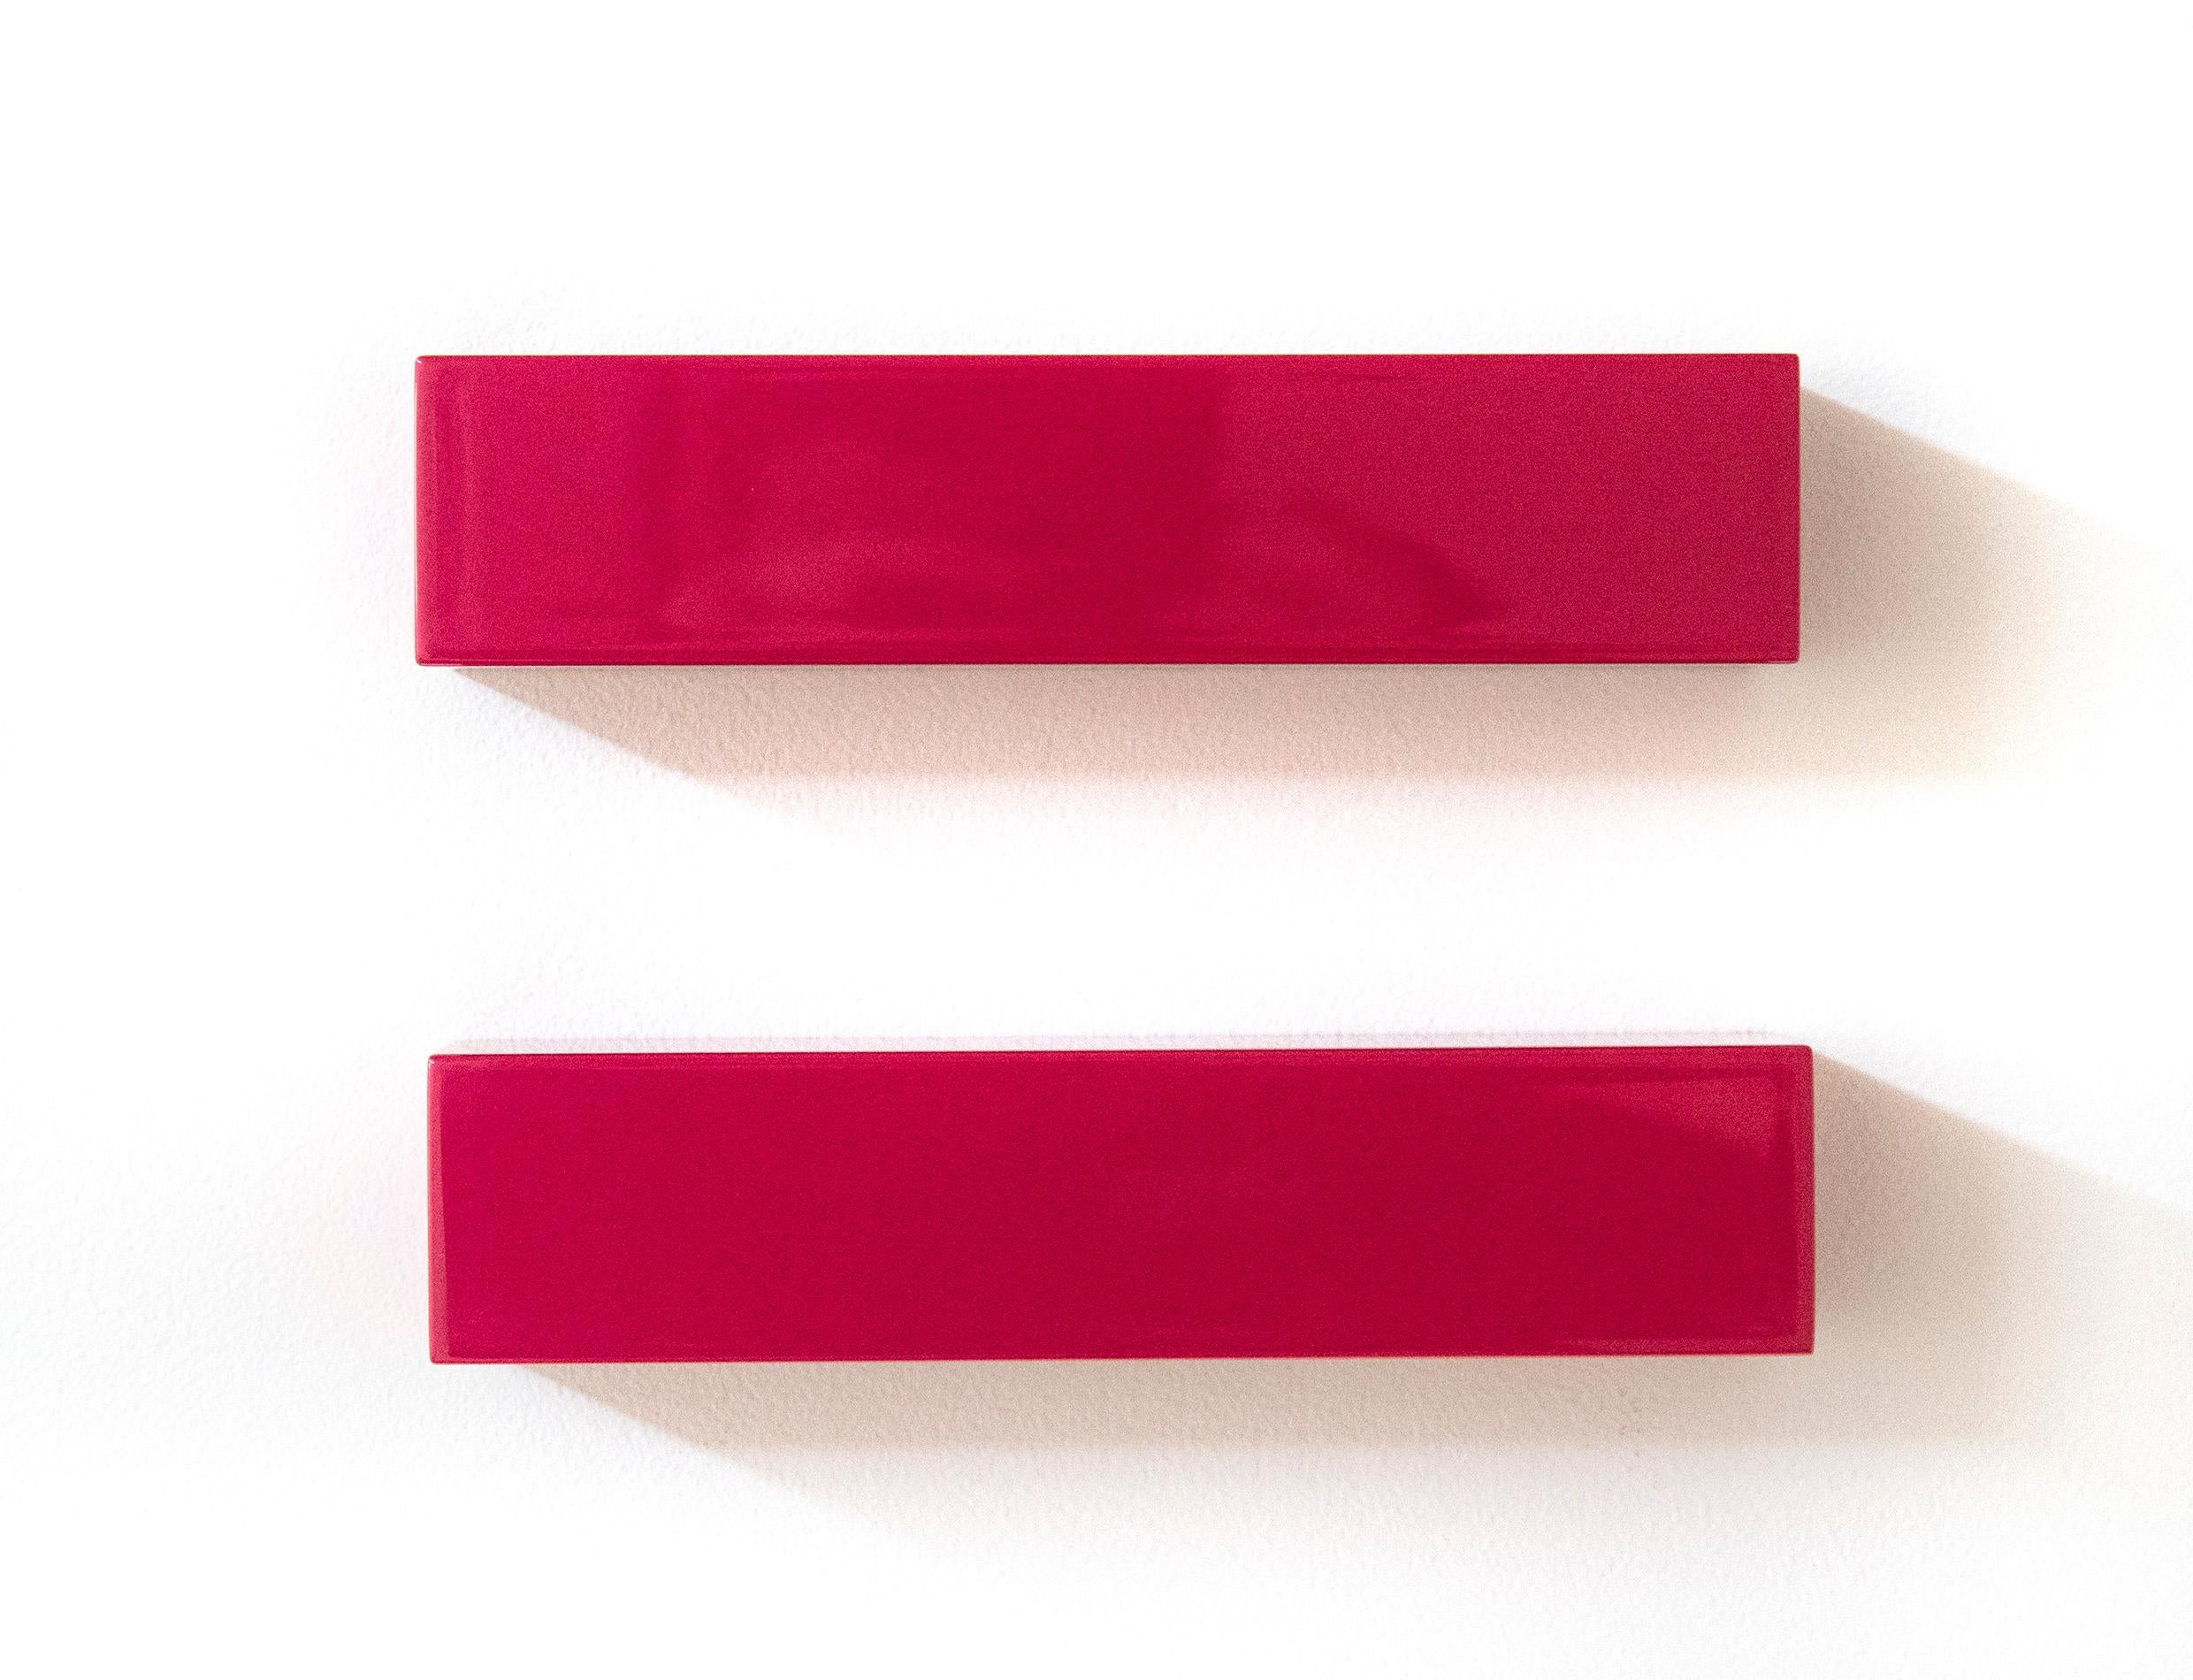 Synchrony - bright, glossy, fuchsia, smooth surfaced, abstract, wall sculpture